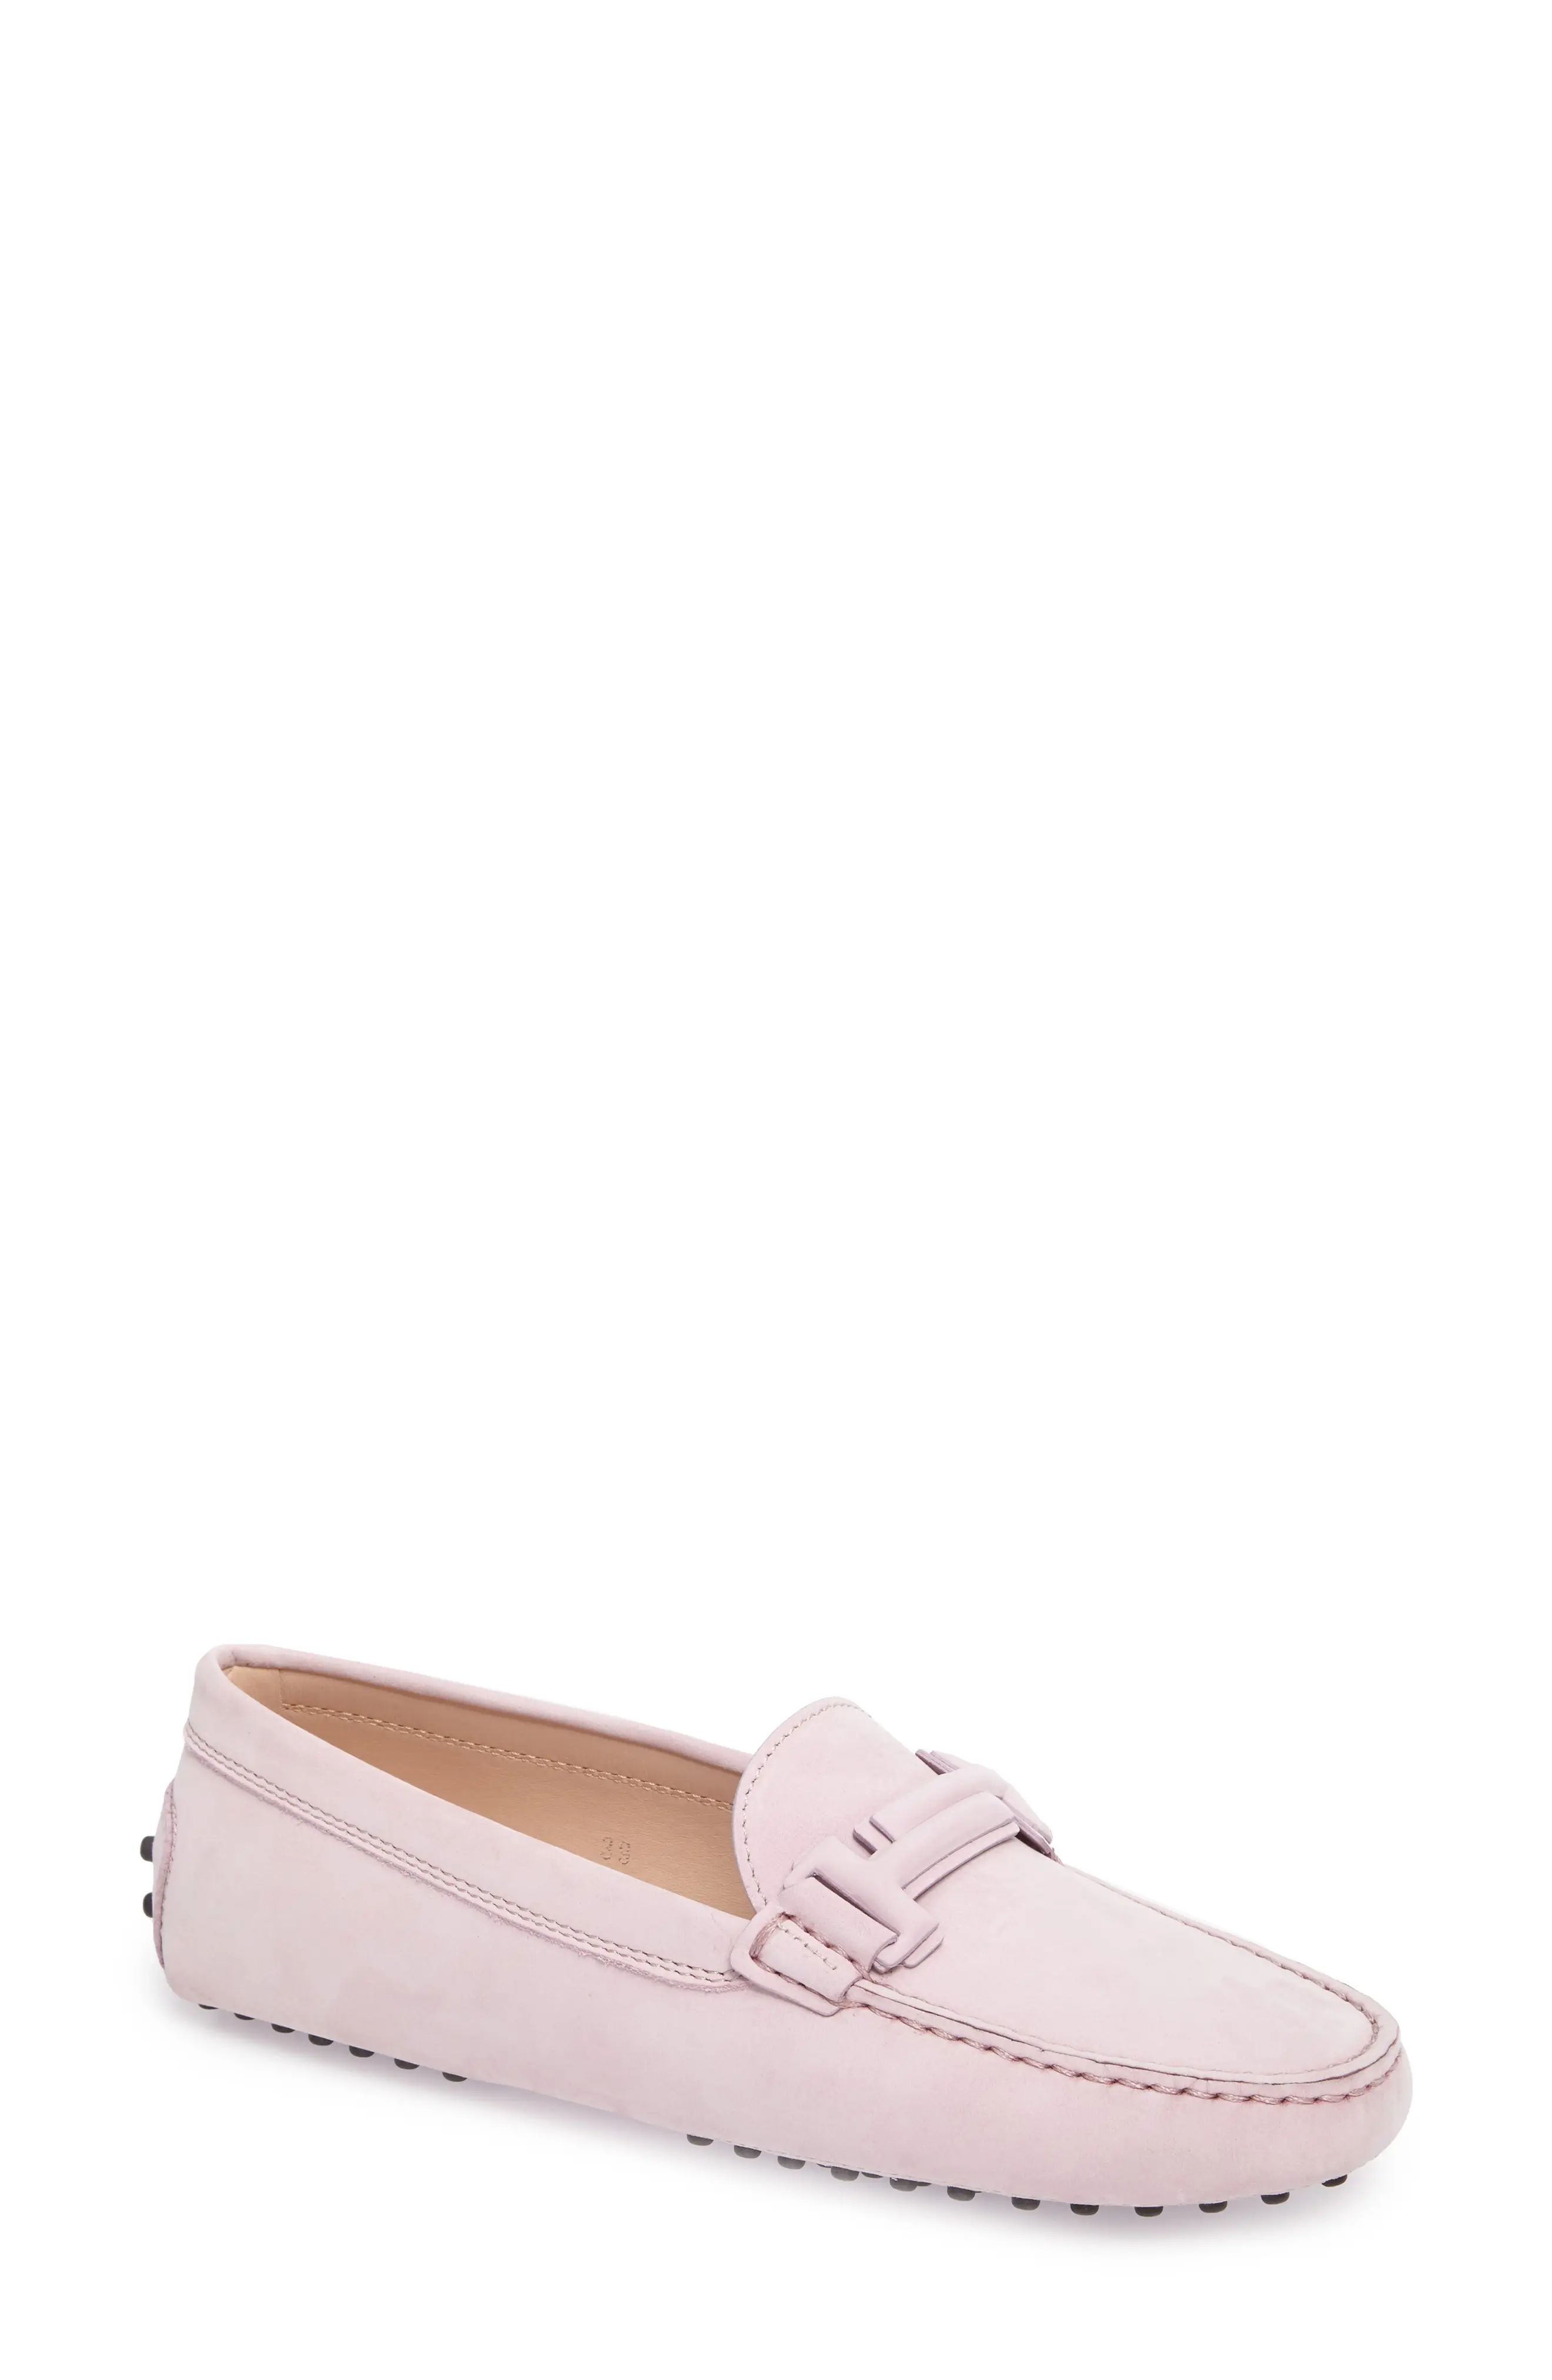 Gommini Covered Double T Loafer | Nordstrom